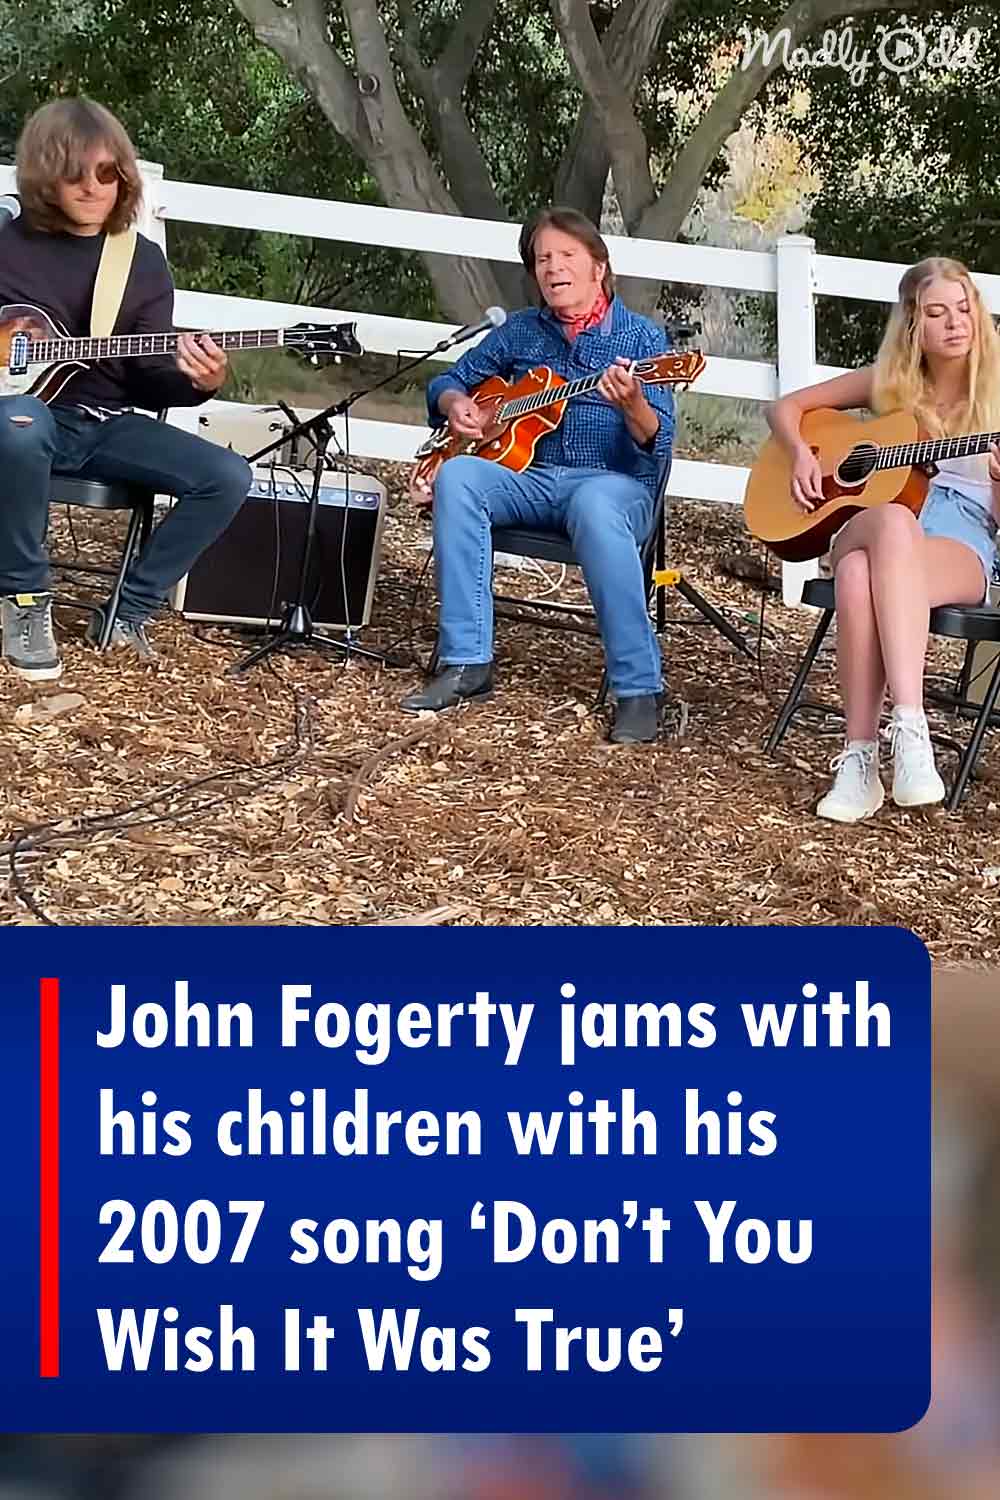 John Fogerty jams with his children with his 2007 song ‘Don’t You Wish It Was True’